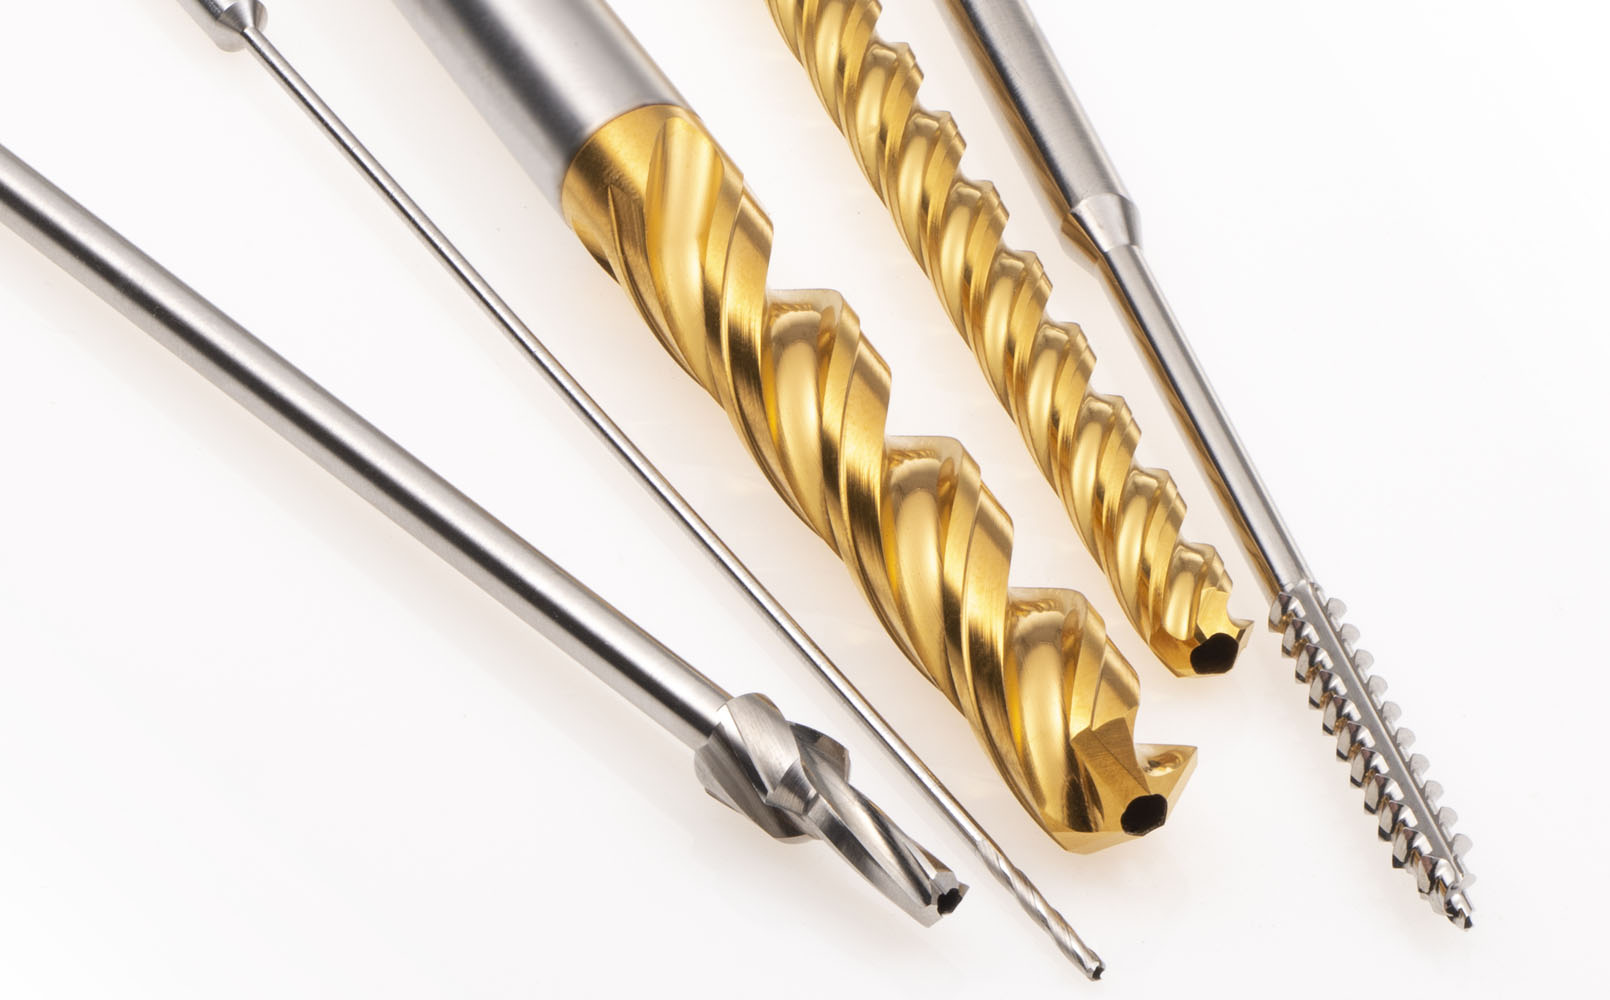 High quality surgical cutting tools